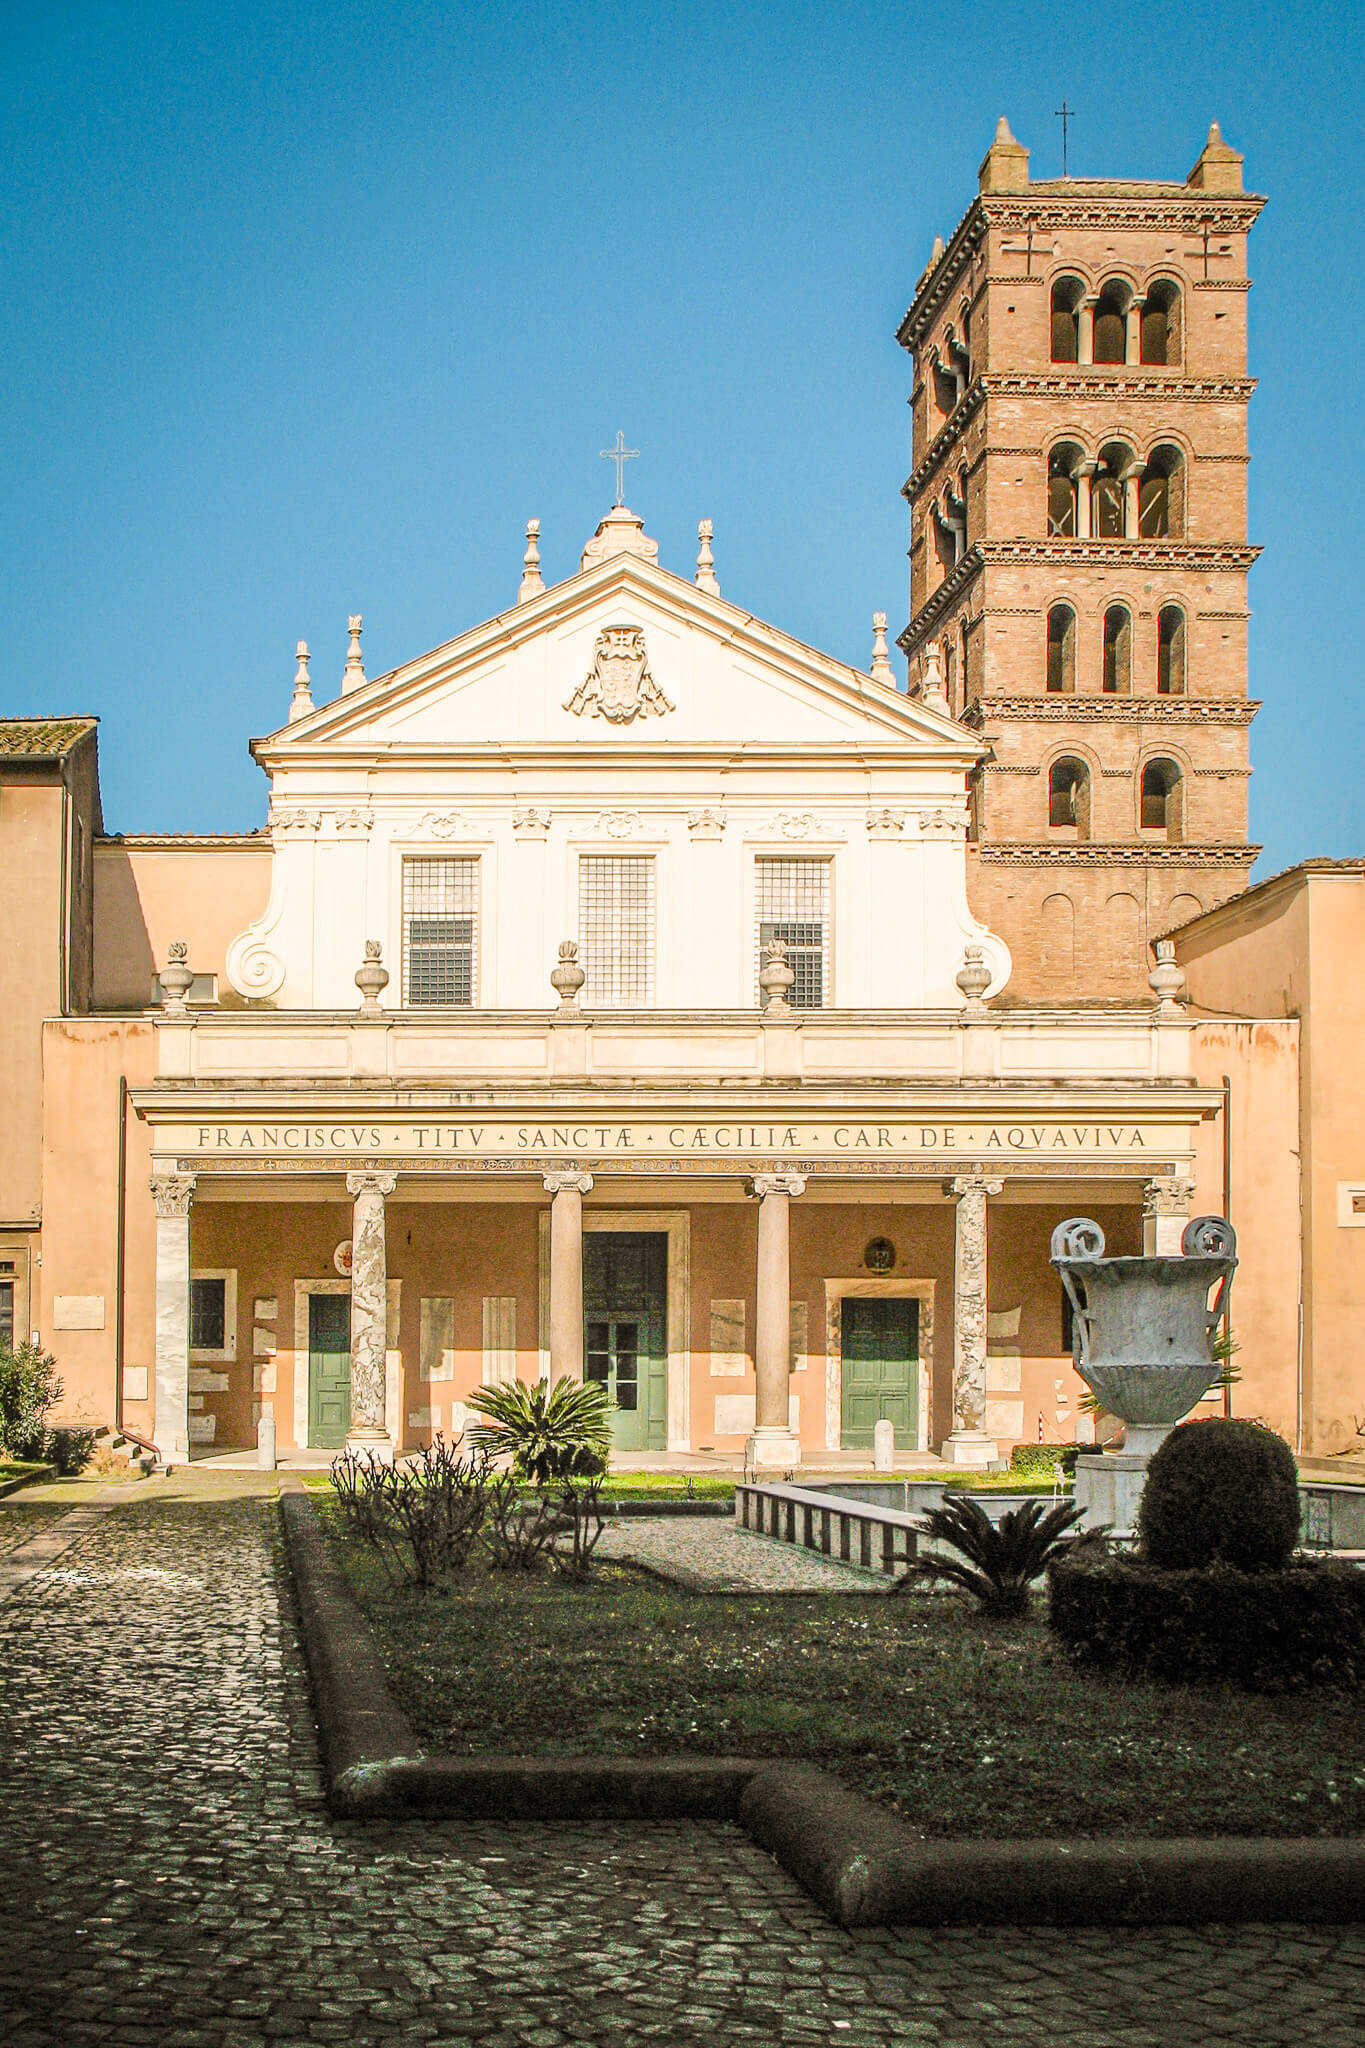 The facade and bell tower of Santa Cecilia in Trastevere